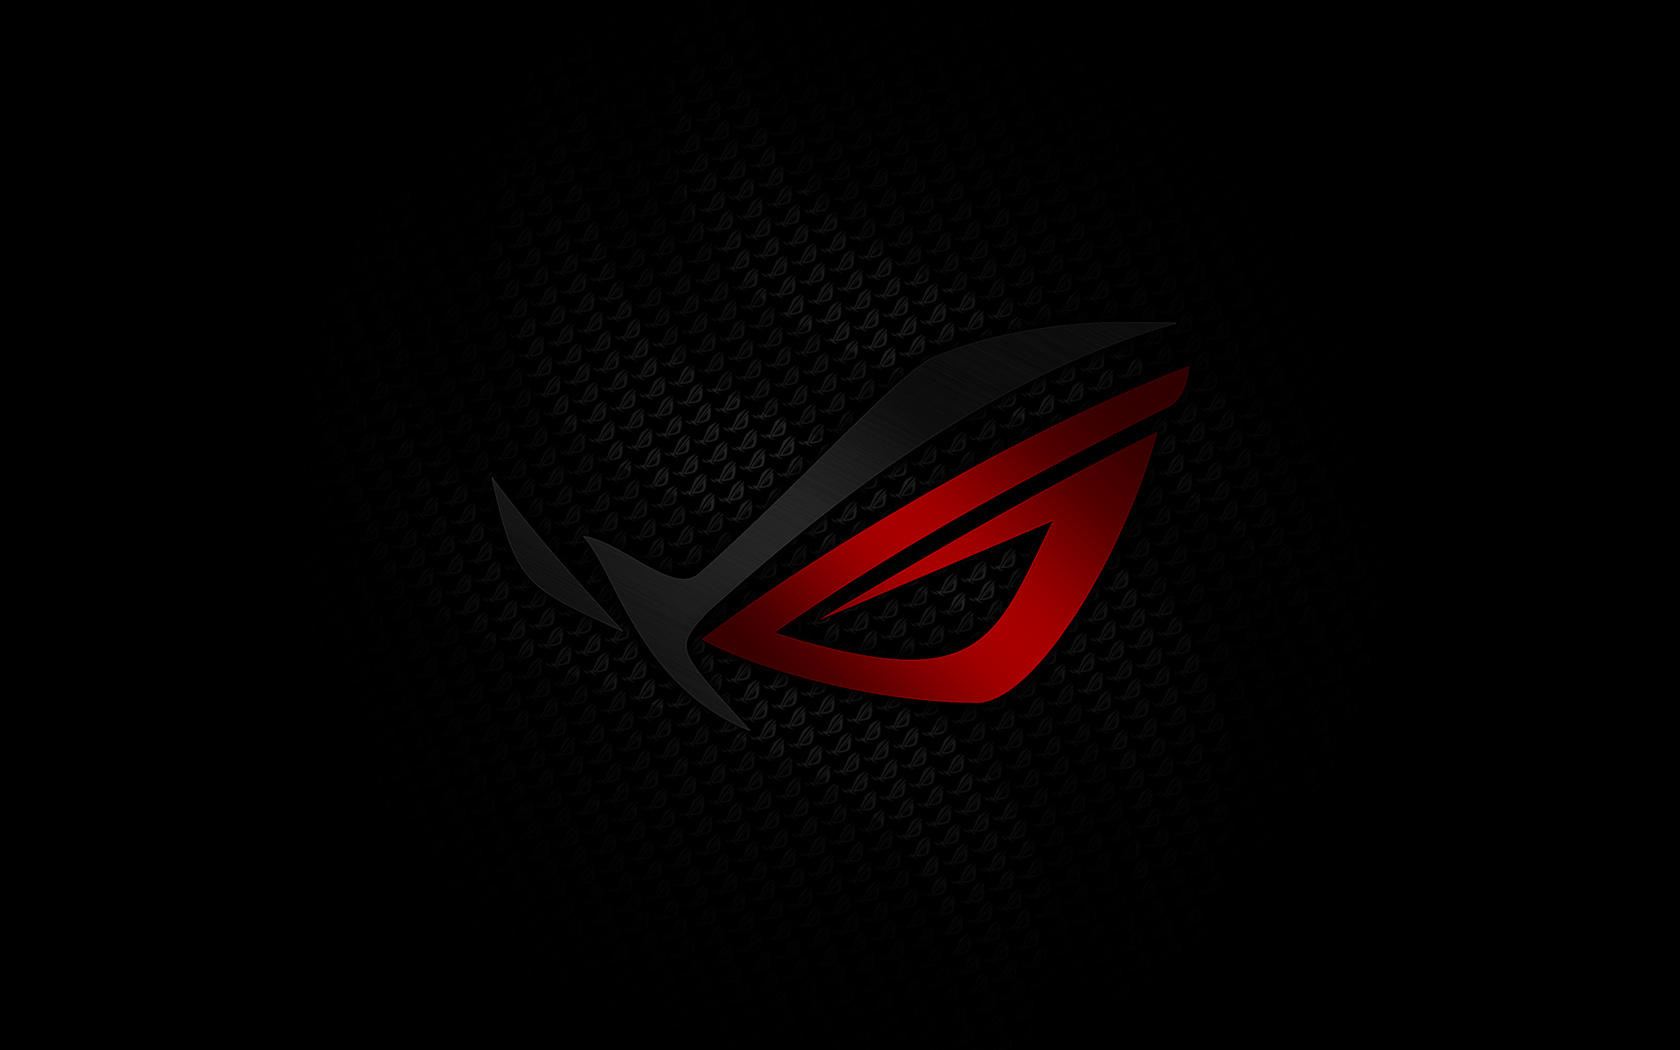 ASUS Republic of Gamers Wallpaper Pack v2 by BlaCkOuT1911 on 